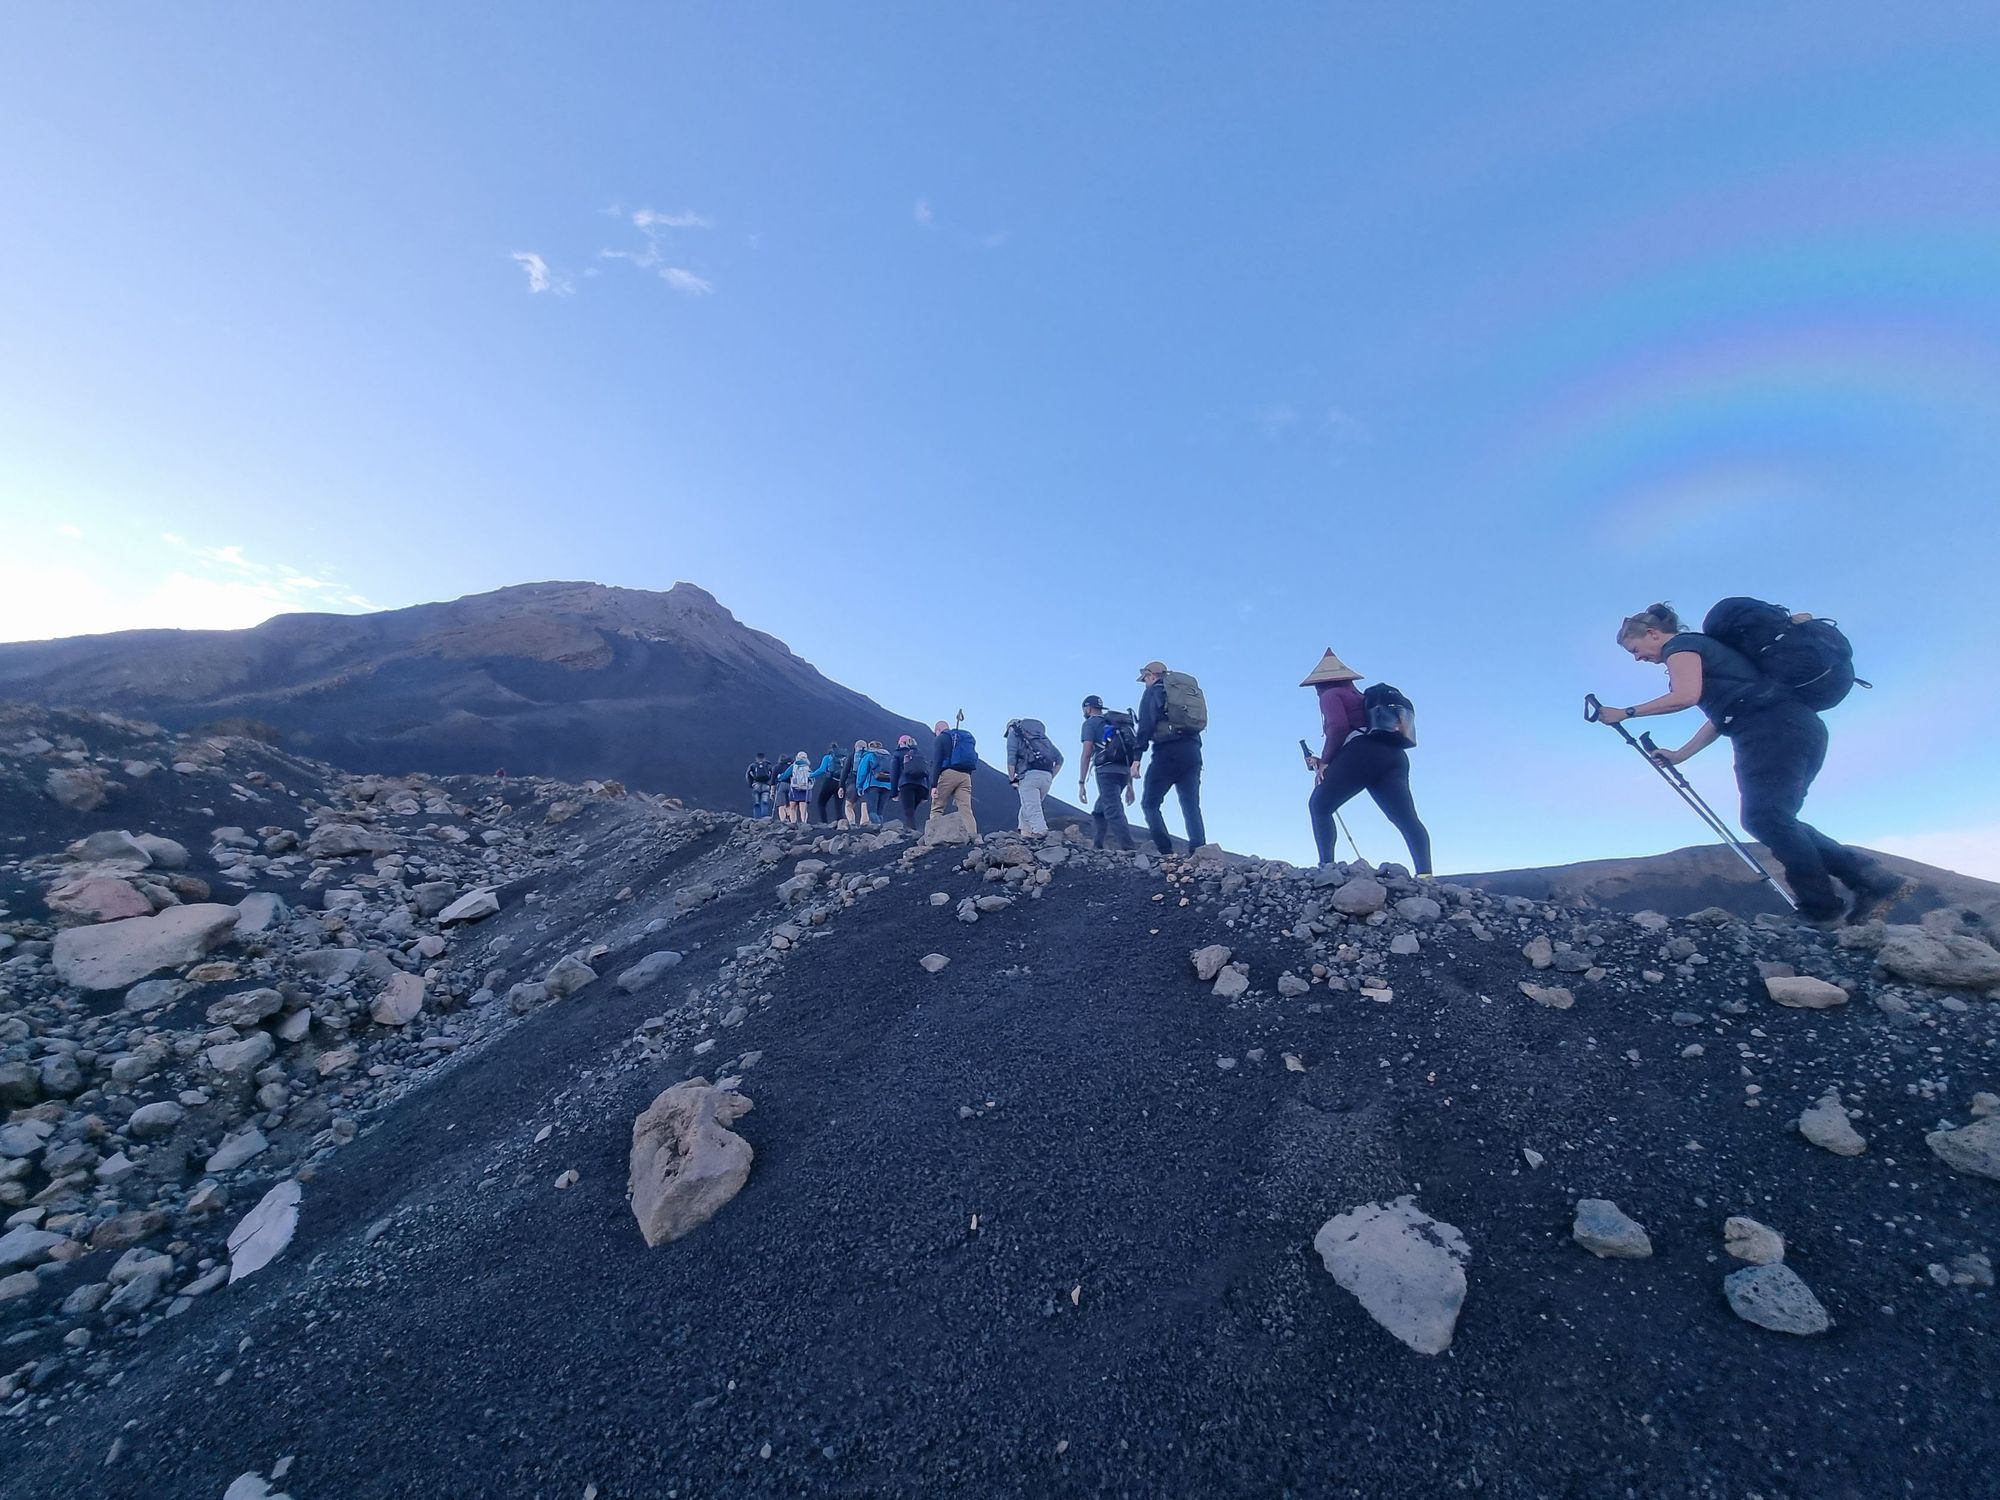 Hikers heading to the summit of Pico do Fogo, Cape Verde